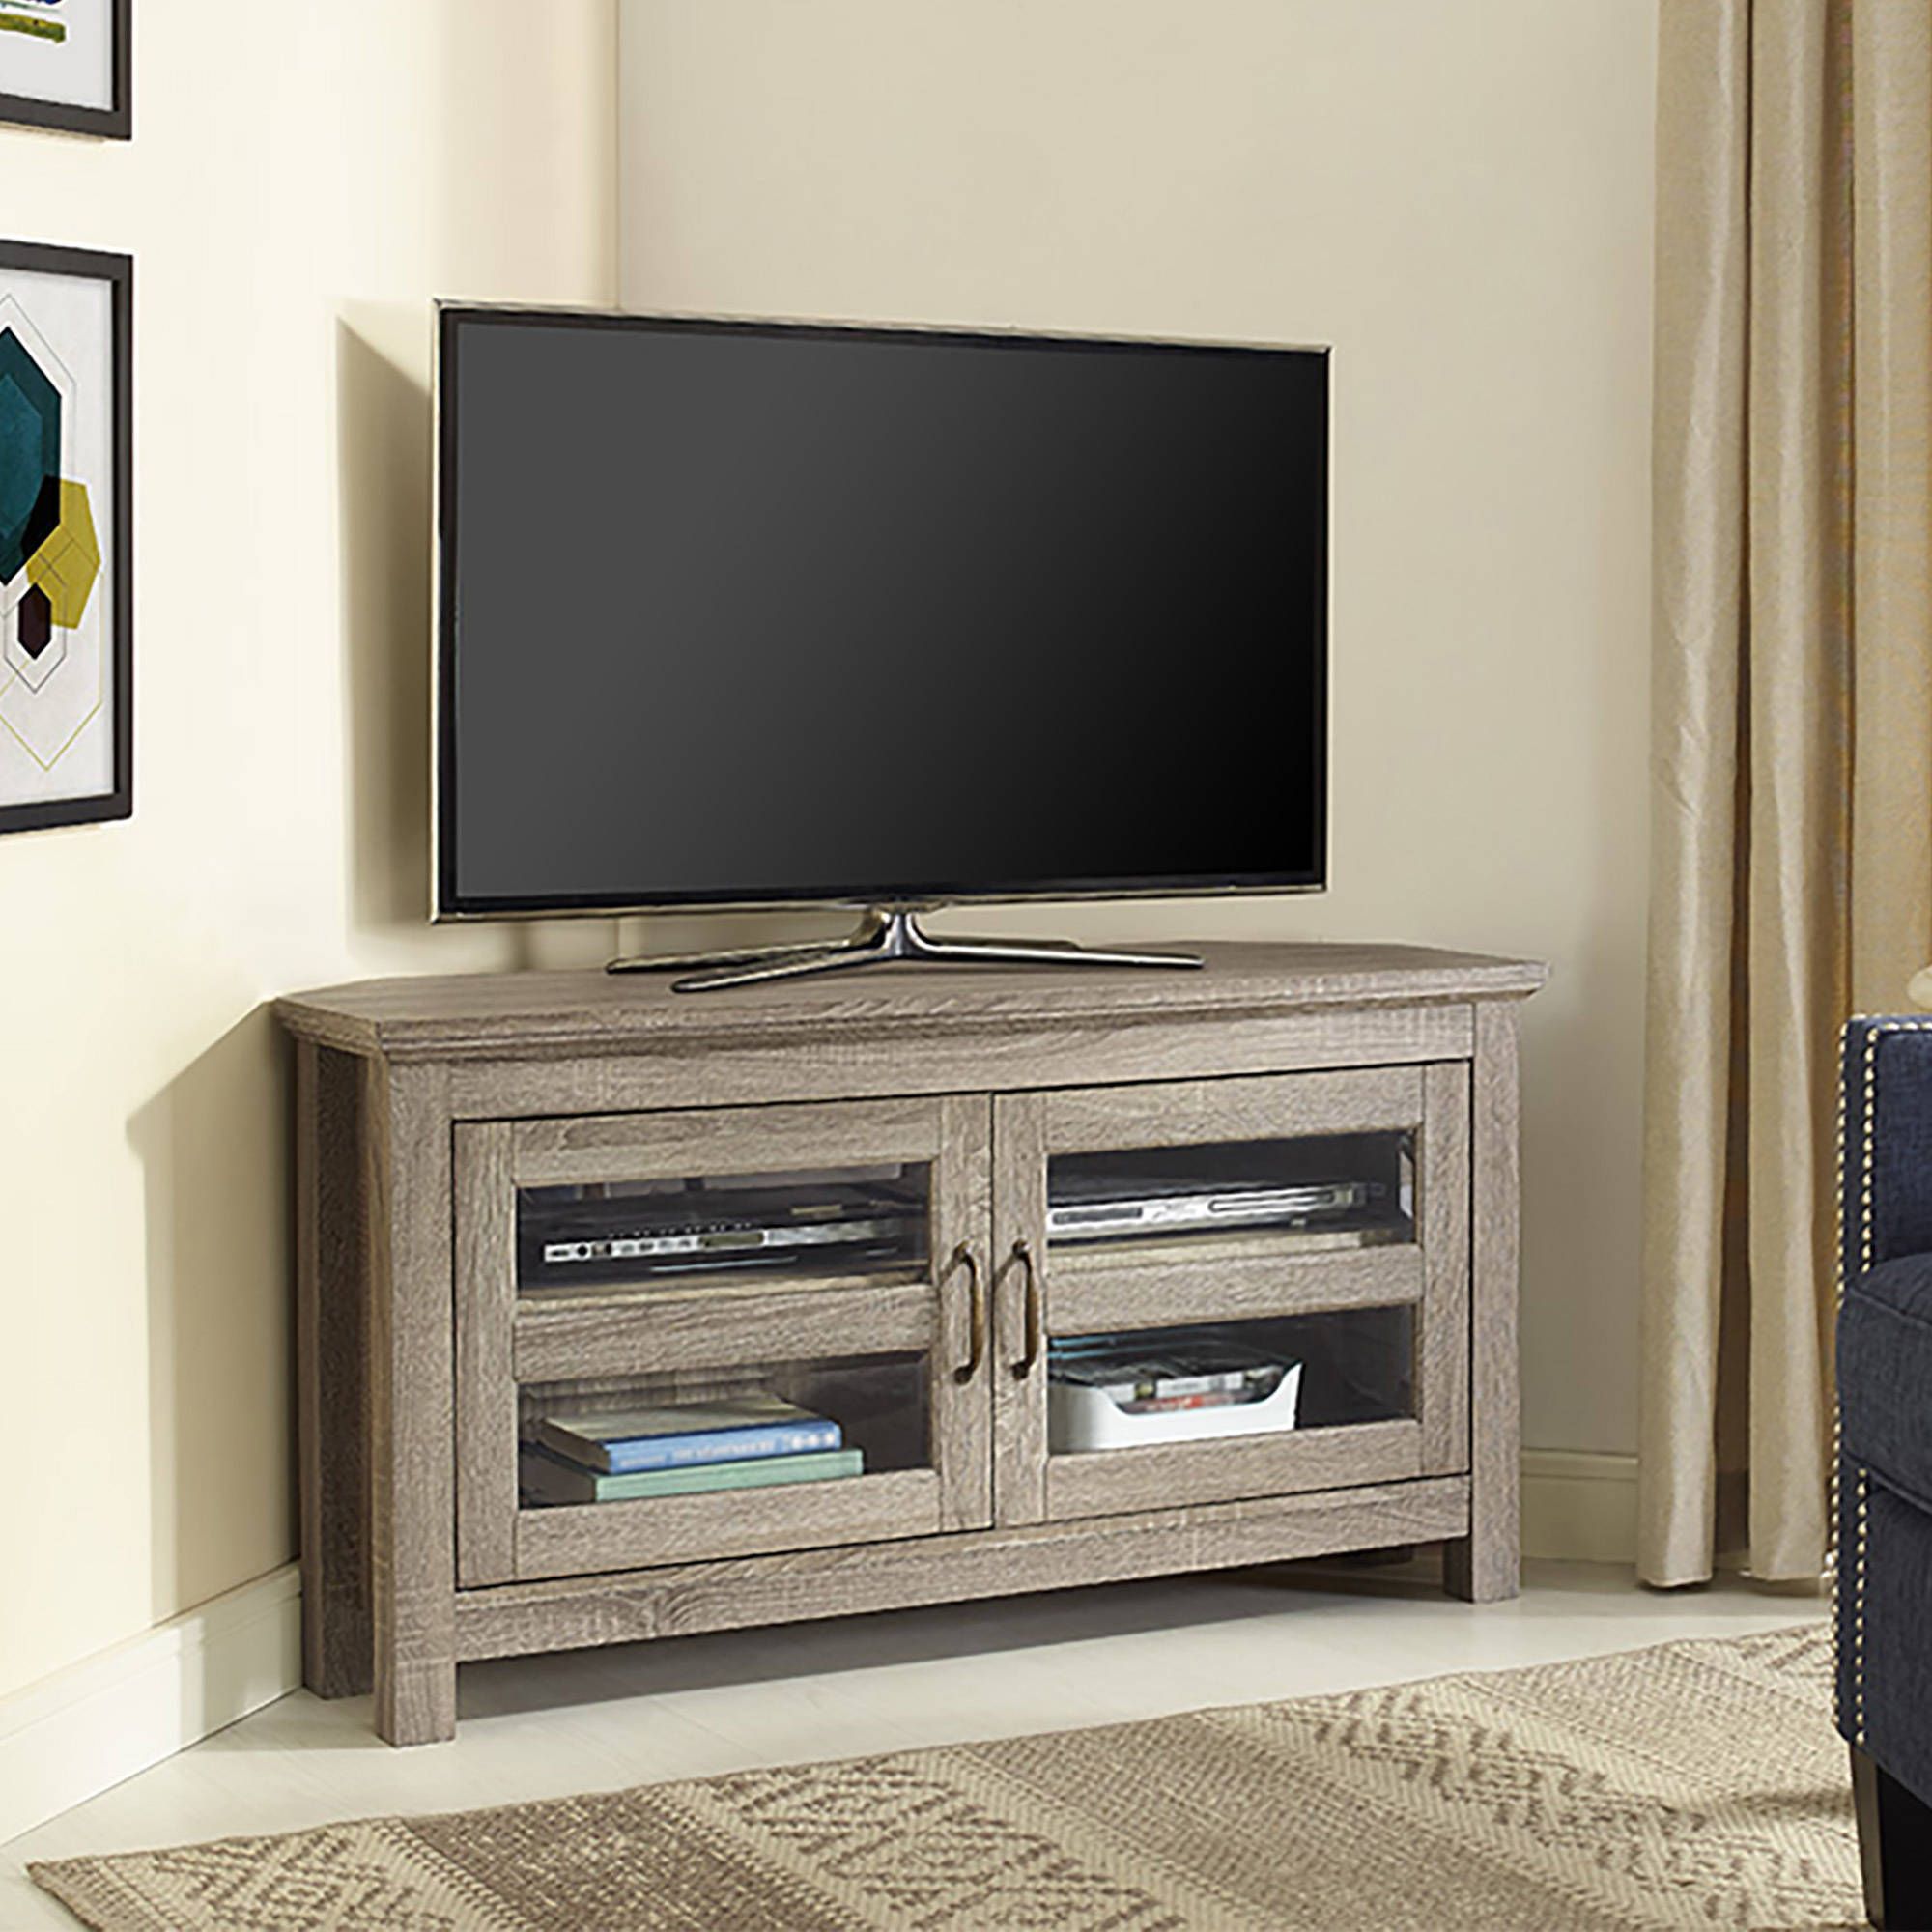 Trendy Cornet Tv Stands In Walker Edison Black Corner Tv Stand For Tvs Up To 48", Multiple (View 10 of 20)